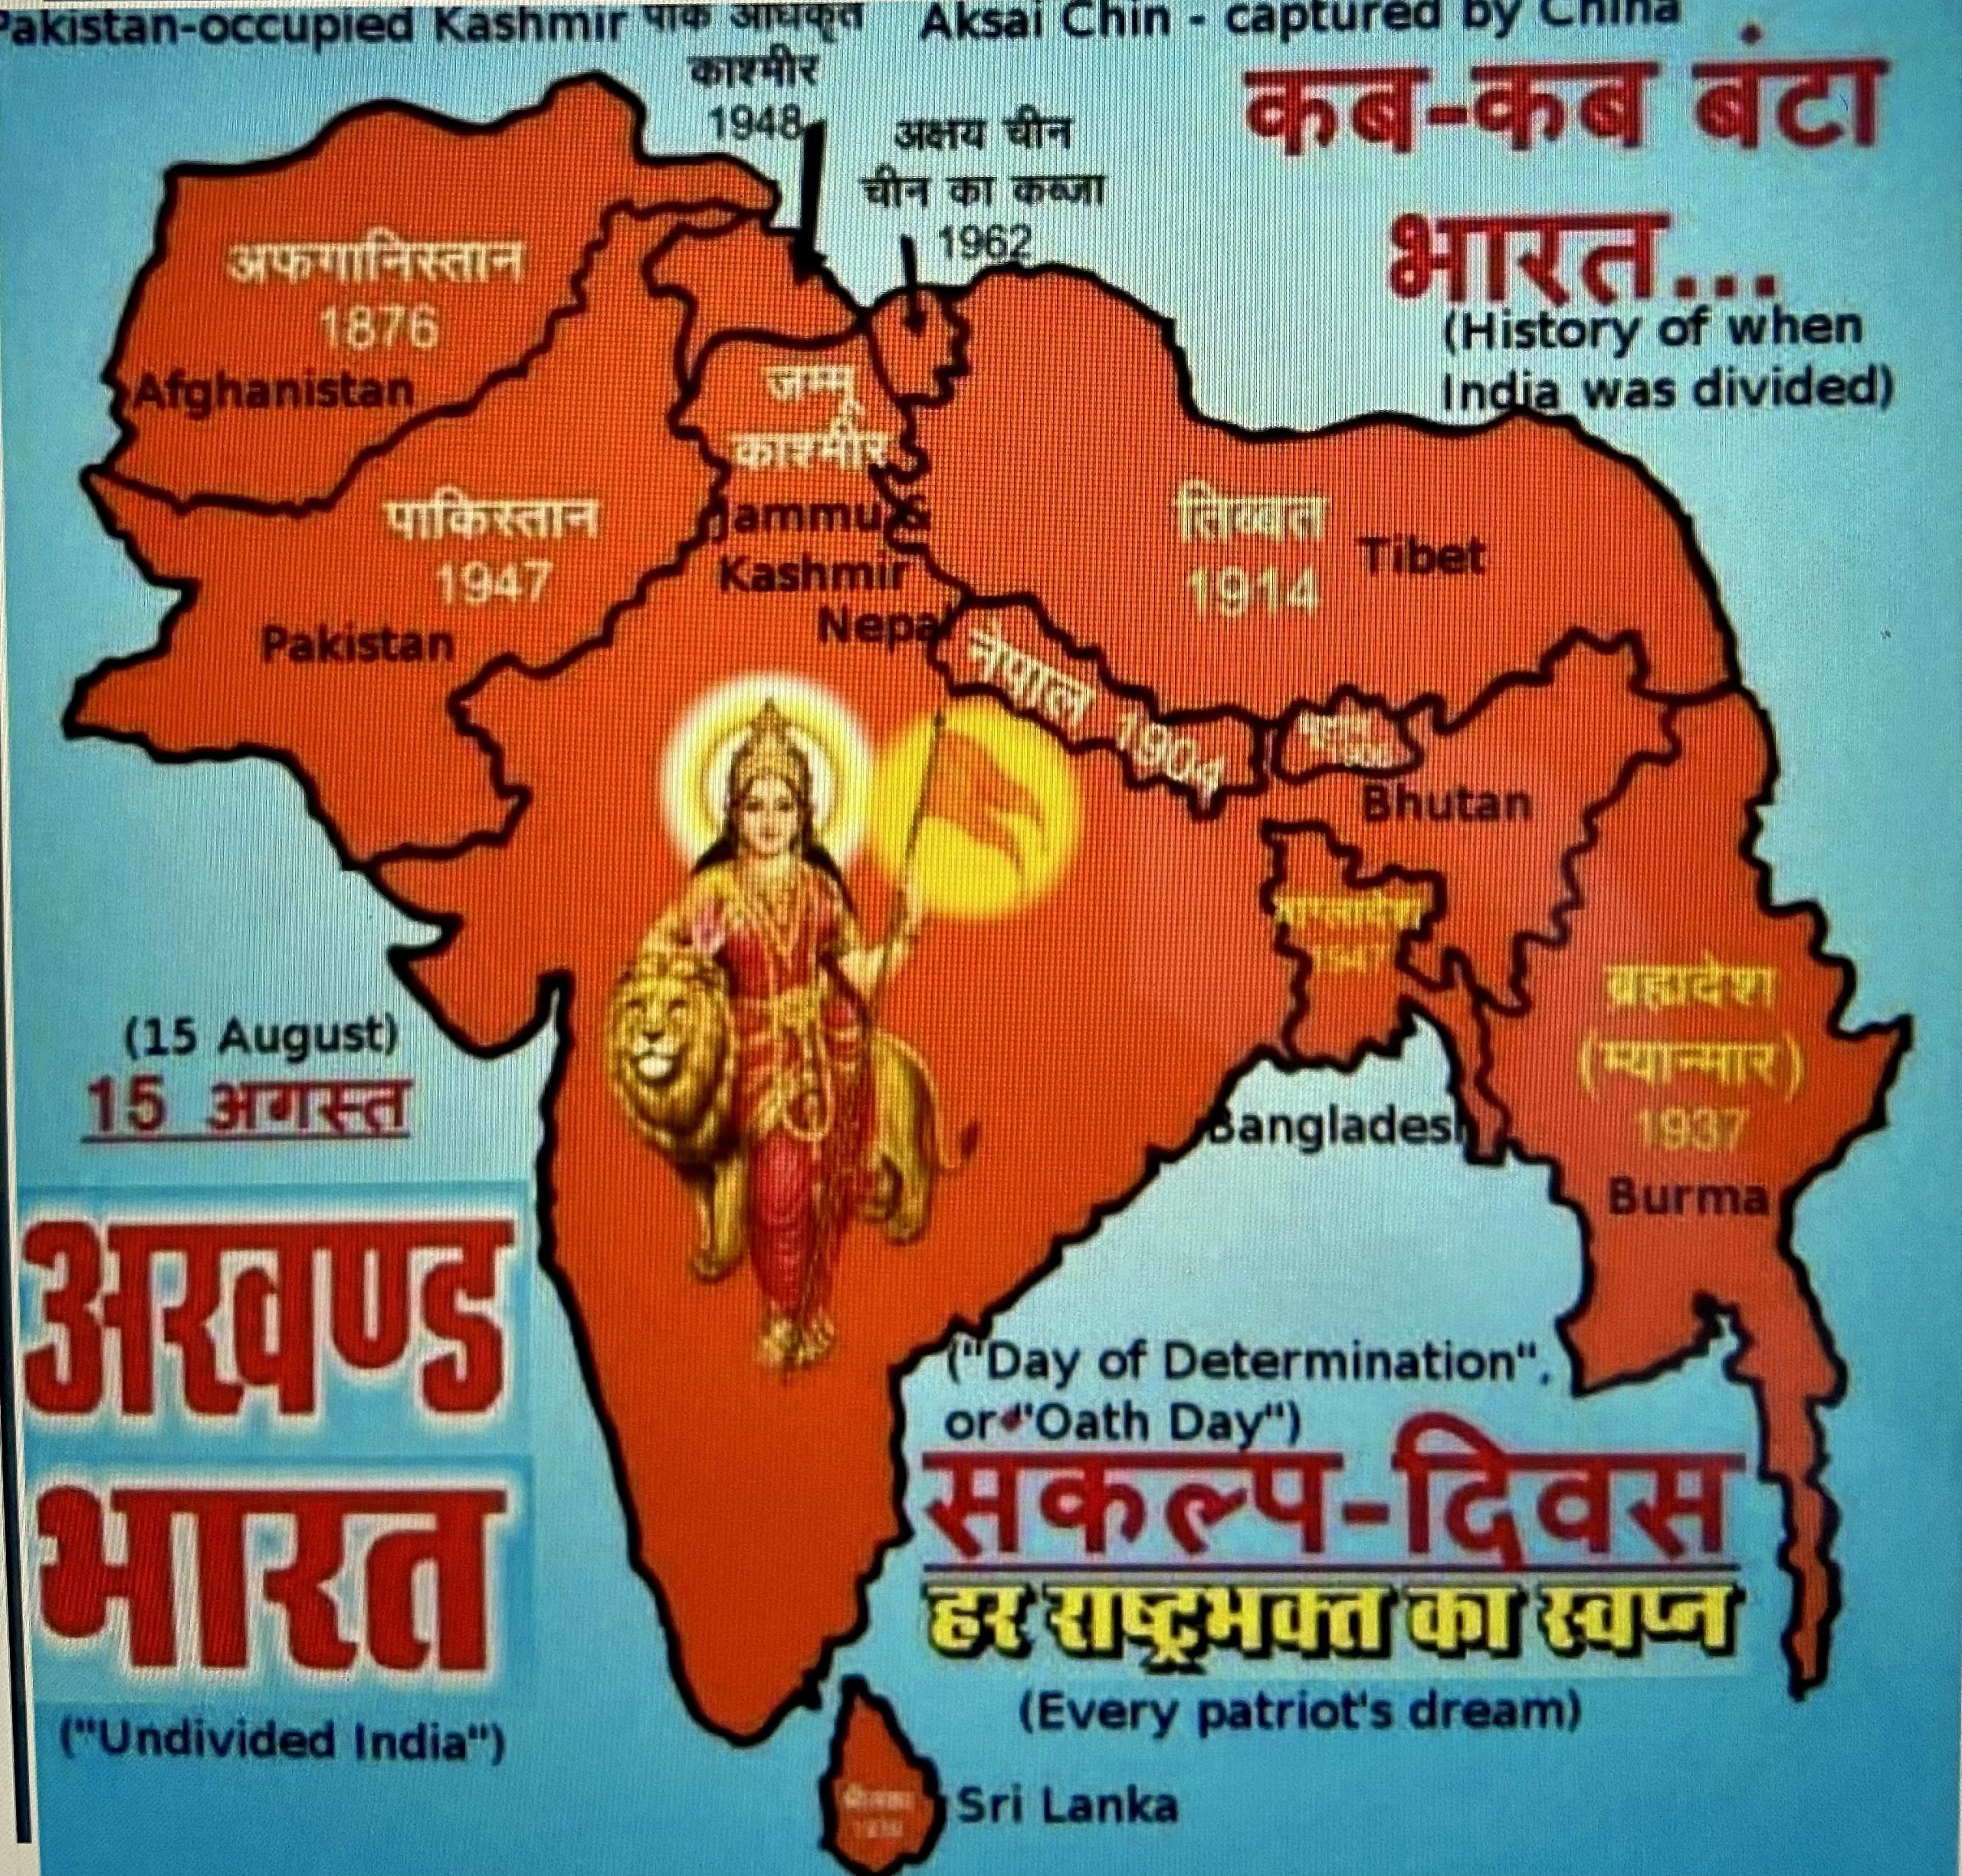 The map kept by RSS members in their homes & offices | By special arrangement